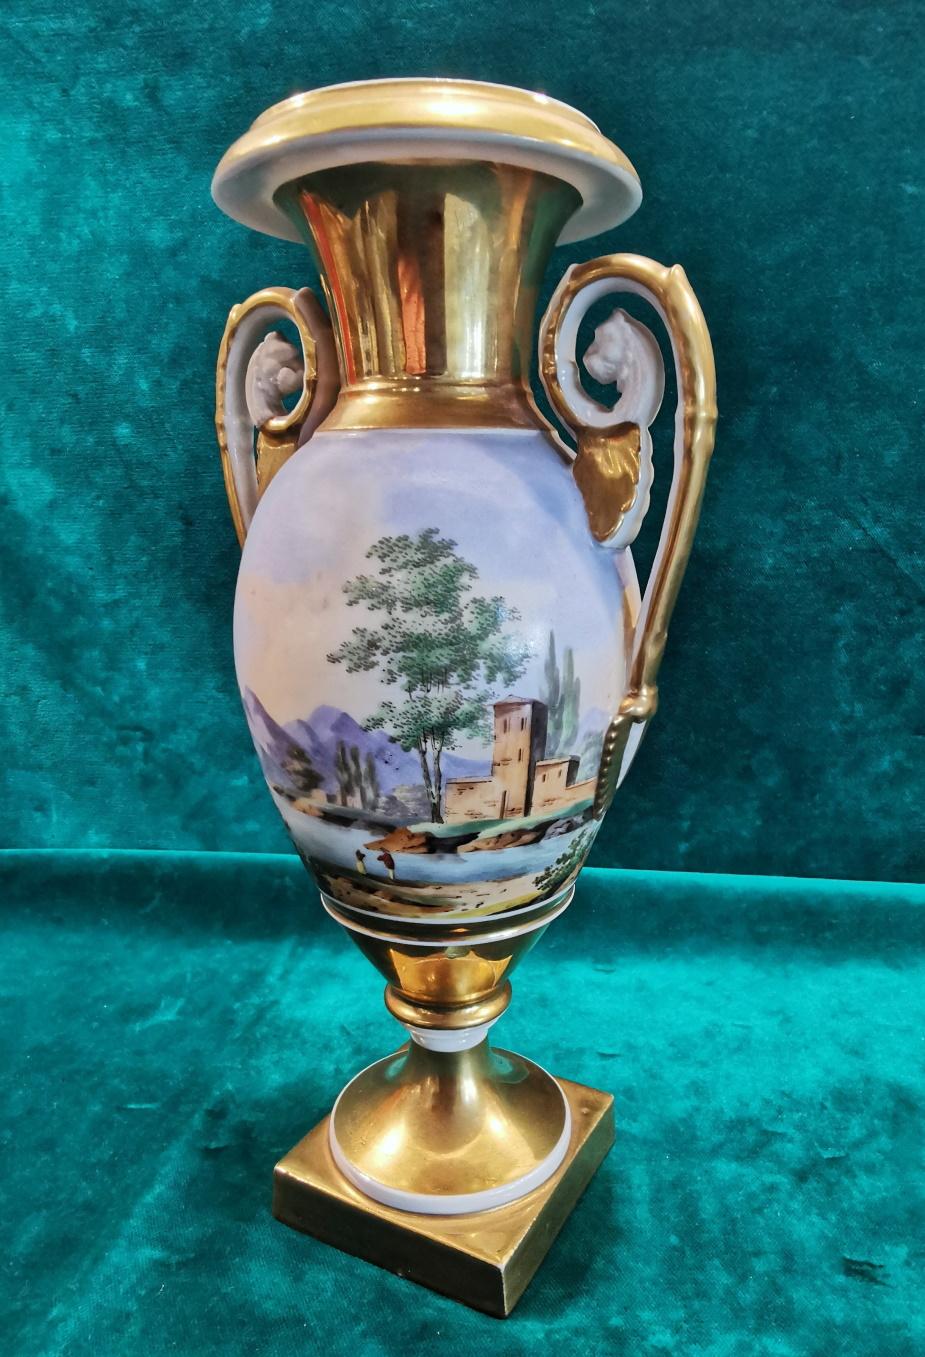 We kindly suggest you read the whole description, because with it we try to give you detailed technical and historical information to guarantee the authenticity of our objects.
Very elegant and iconic vase made of white French porcelain; the